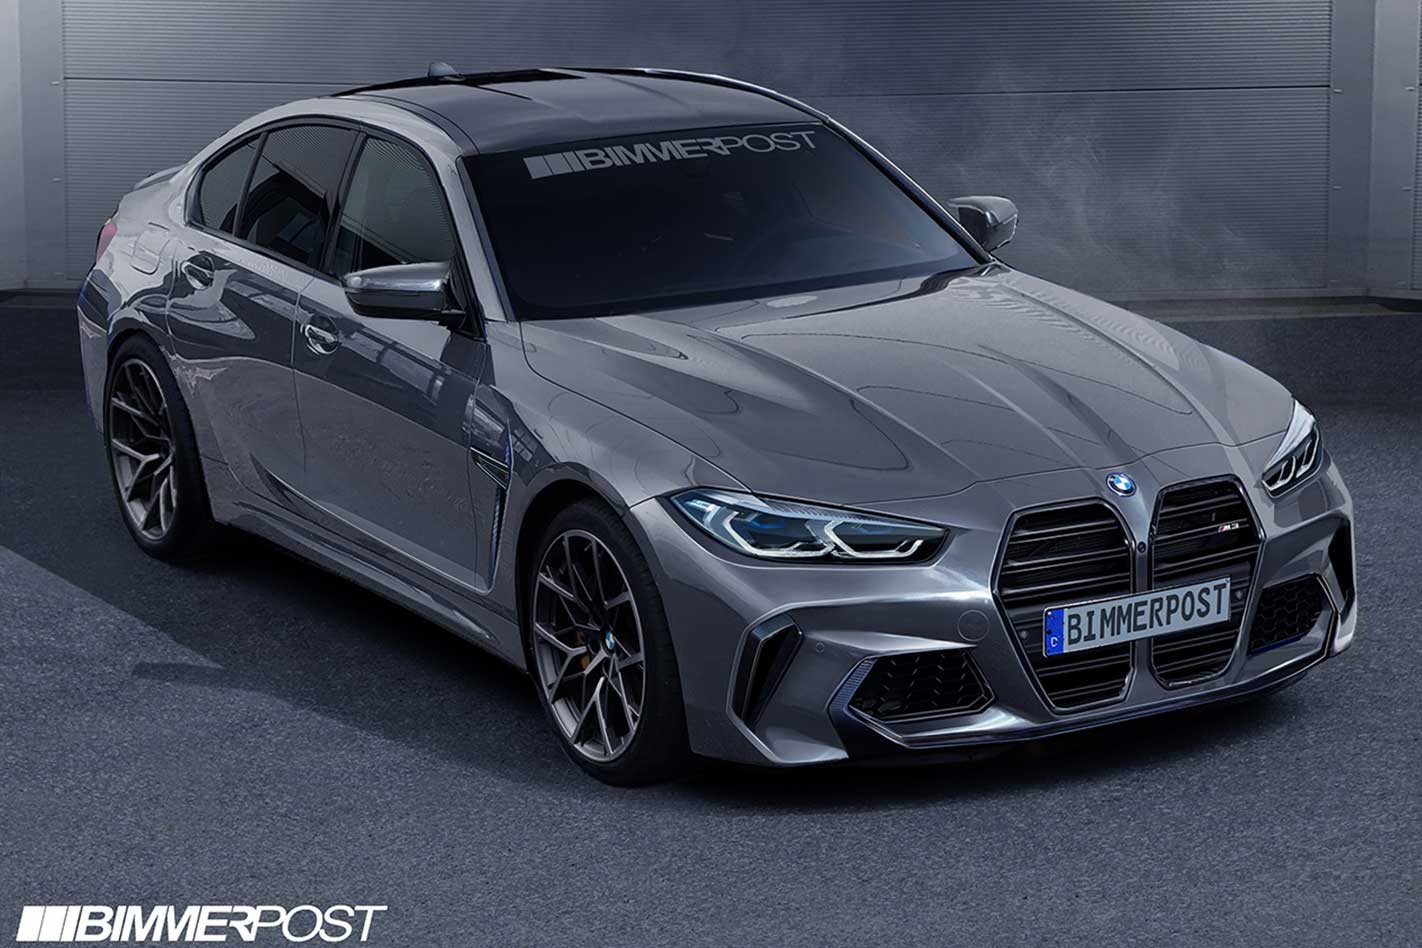 2020 BMW M3 big grille likely, evidence examined